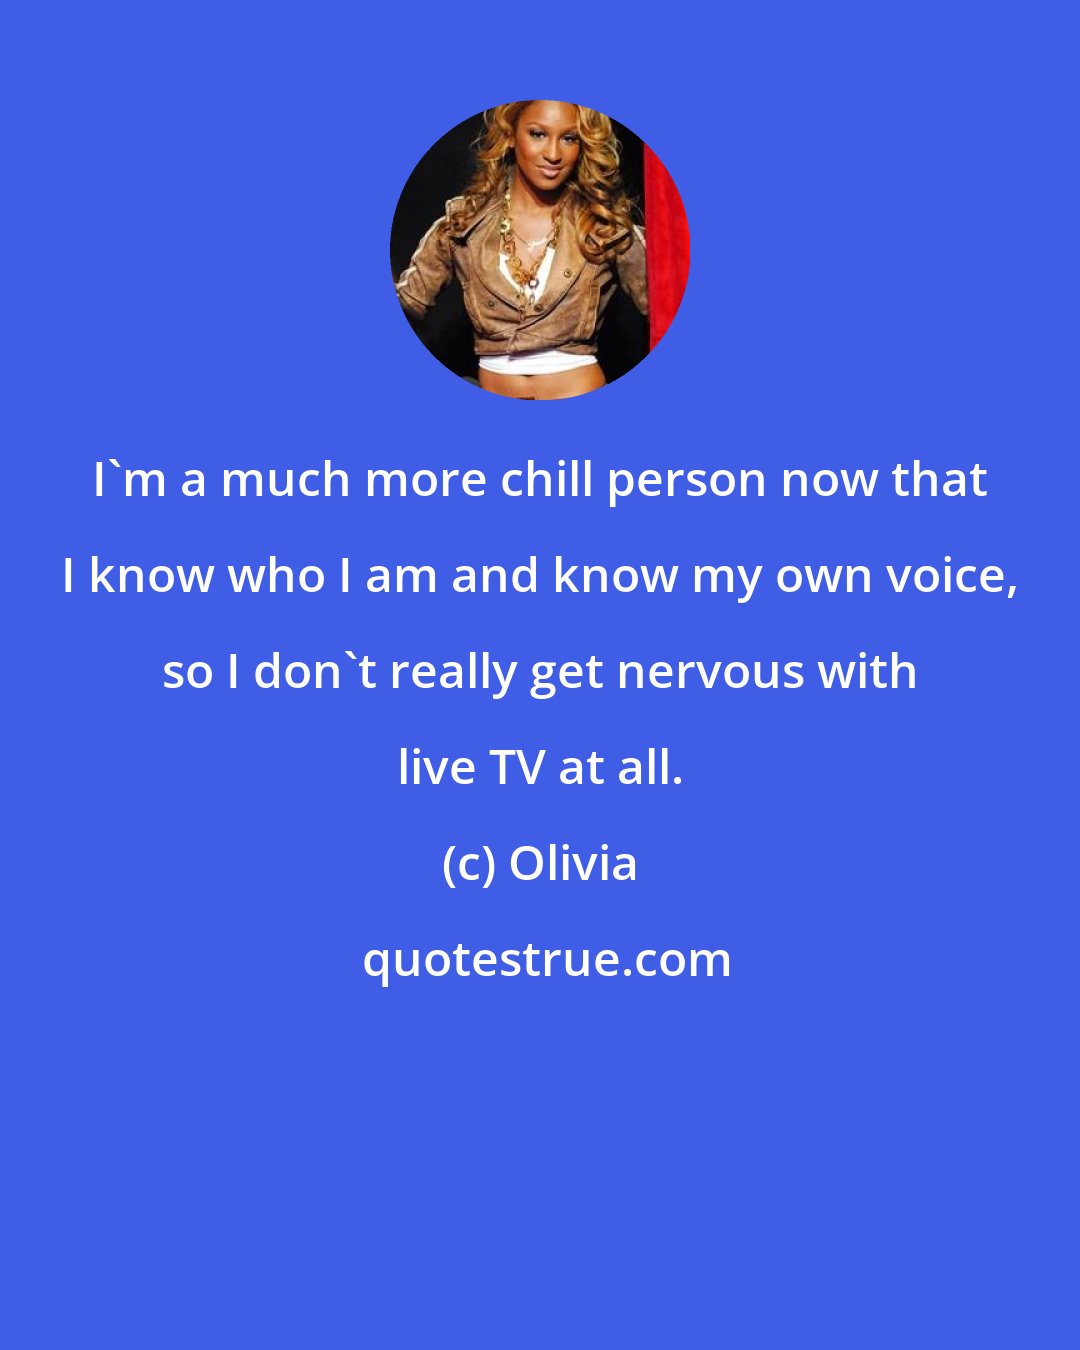 Olivia: I'm a much more chill person now that I know who I am and know my own voice, so I don't really get nervous with live TV at all.